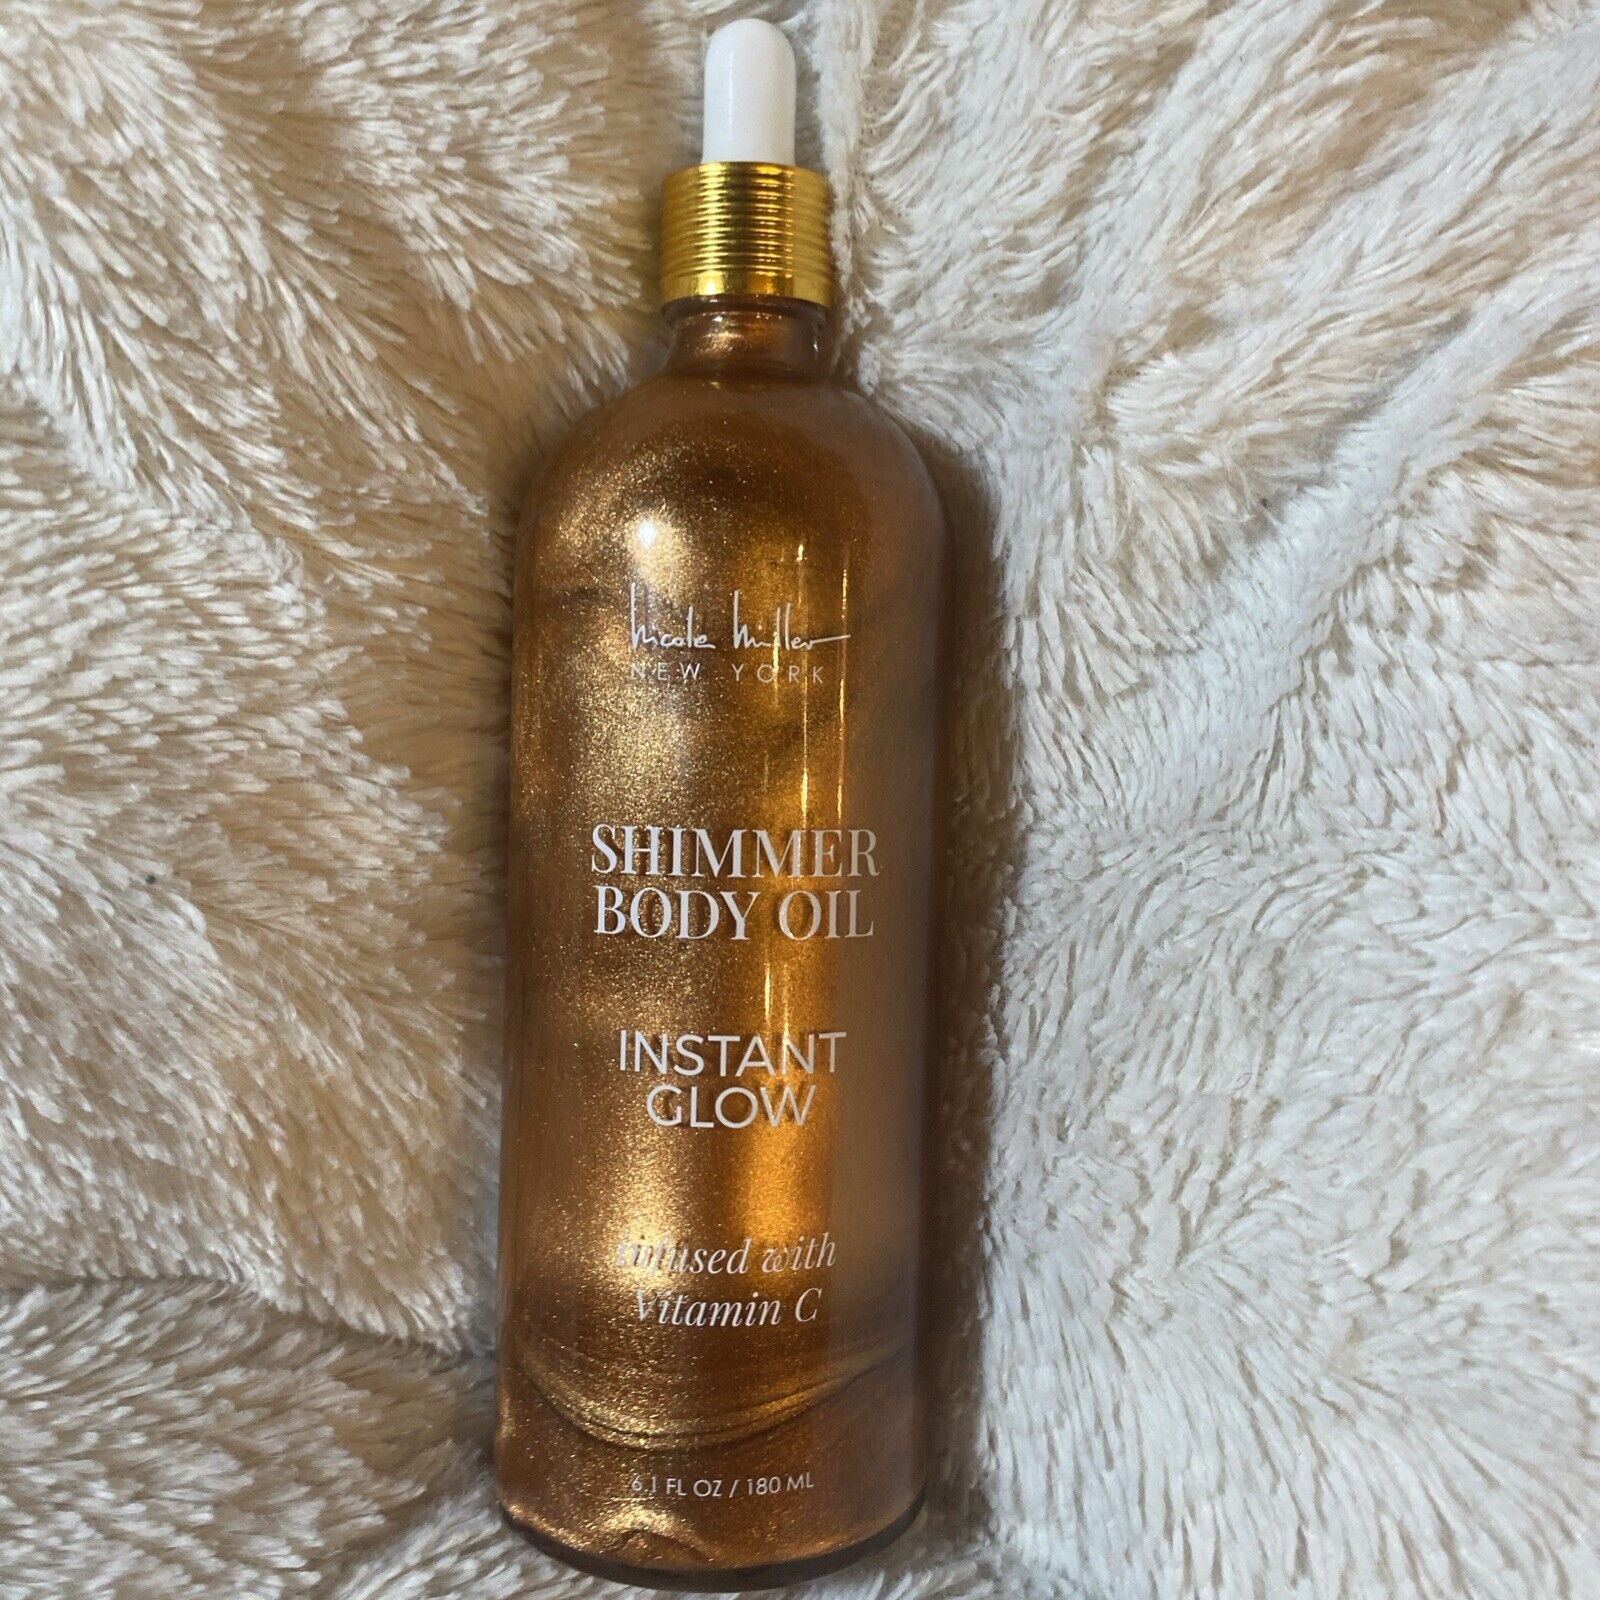 NEW NICOLE MILLER NEW YORK SHIMMER BODY OIL INSTANT GLOW INFUSED W/VITAMIN C